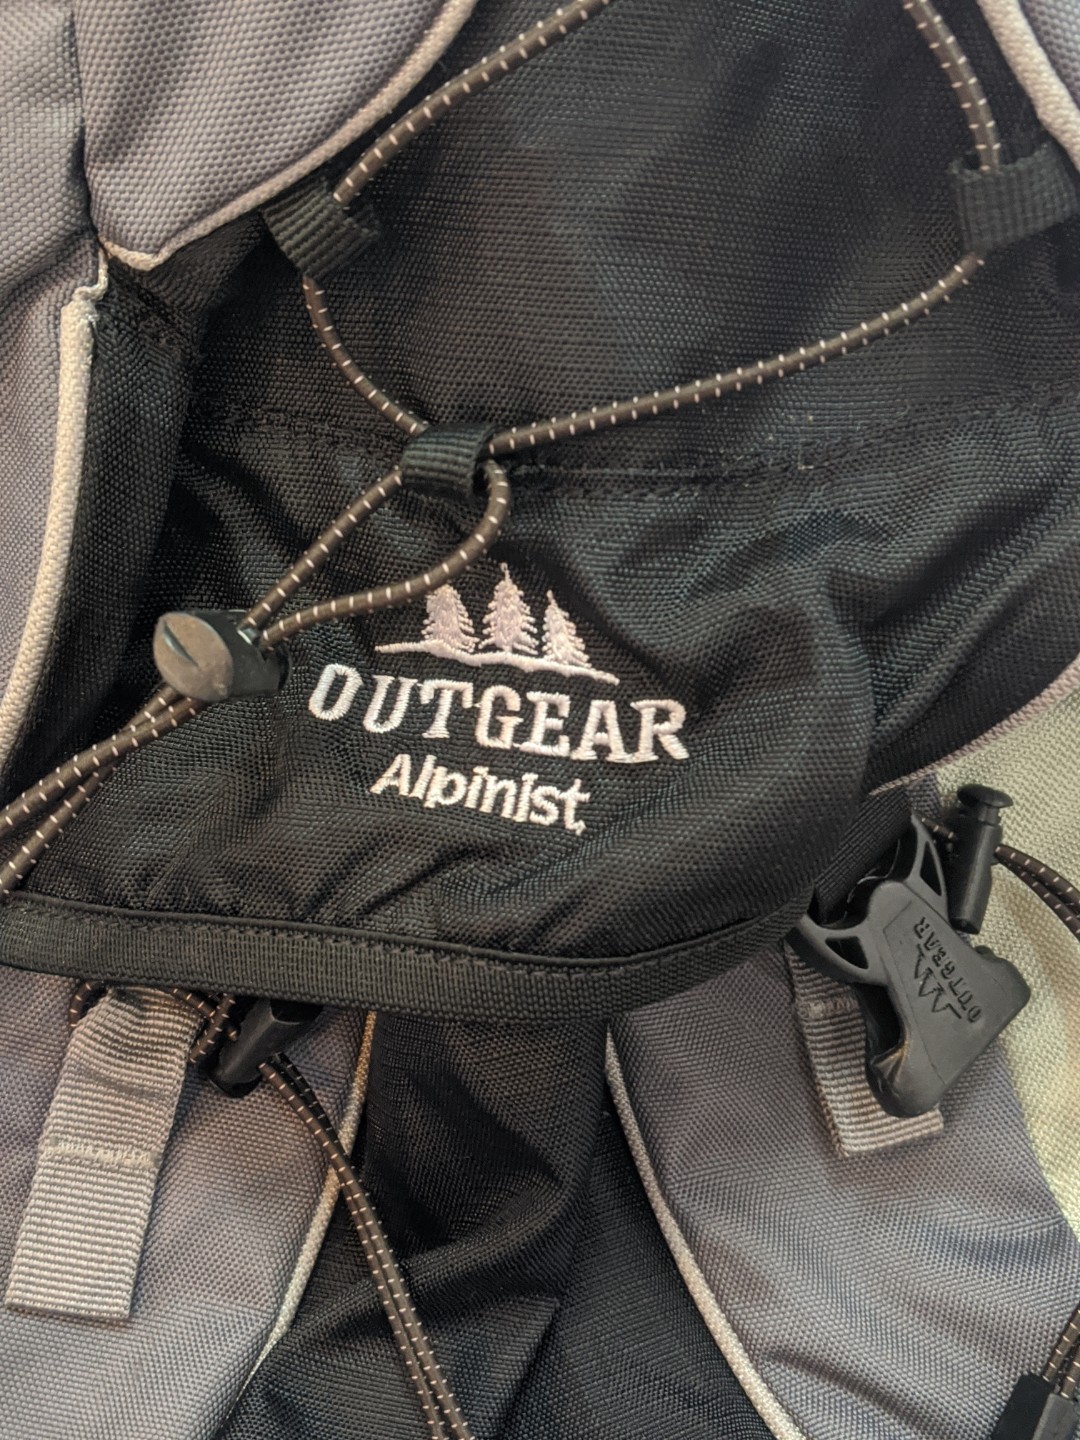 Outgear alpinist Backpack 50L, Sports Equipment, Hiking & Camping on ...